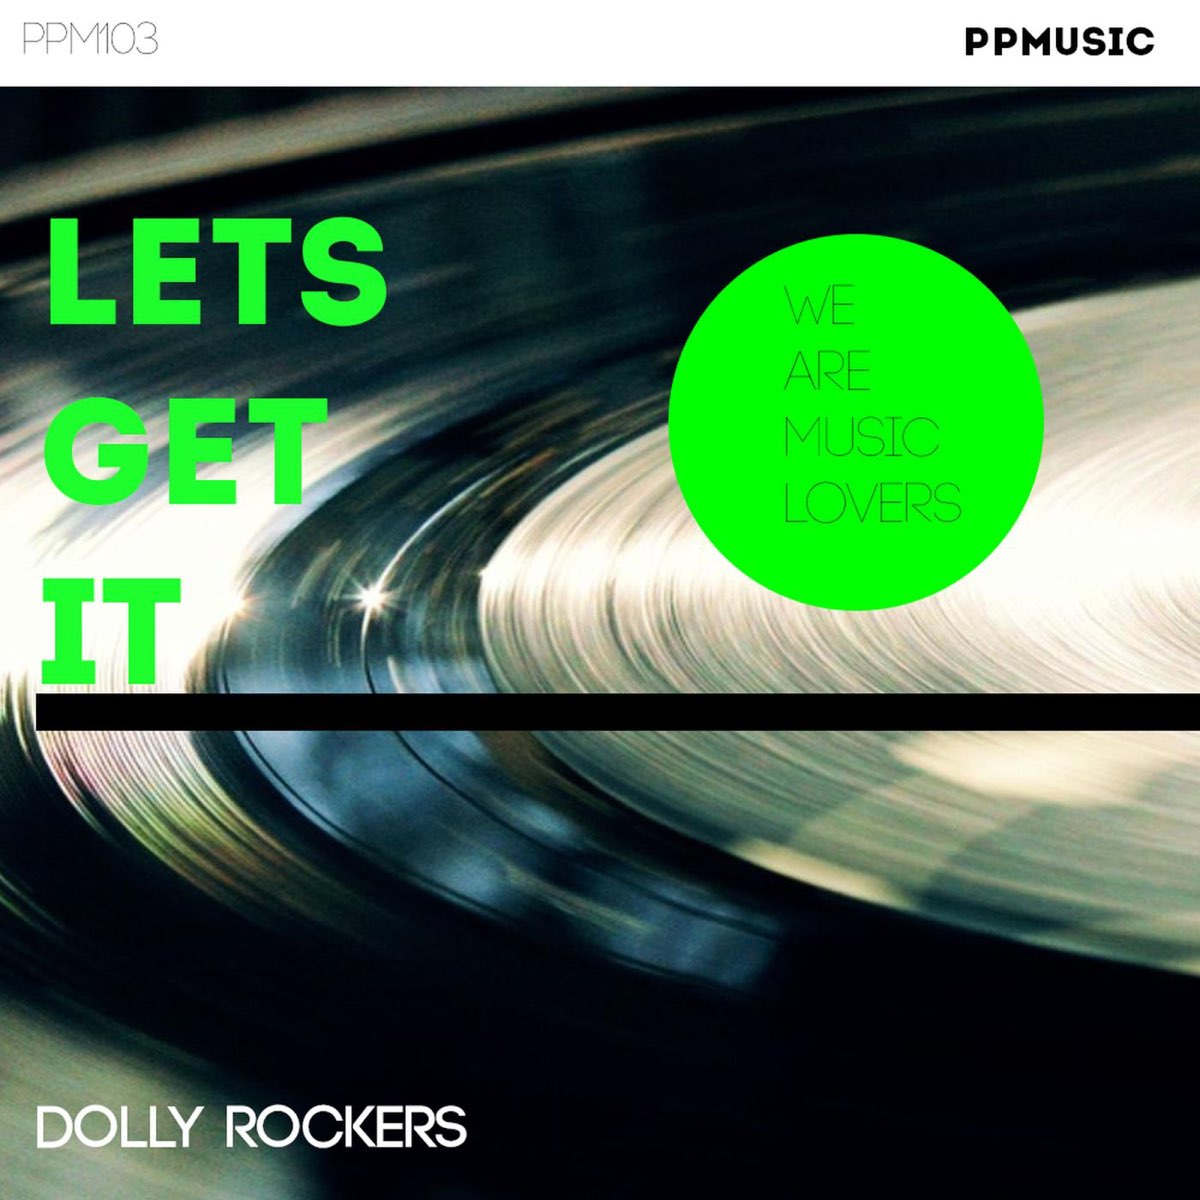 Dolly Rockers. Lets get it. The only one the Dolly Rocker Movement. Lets get it done